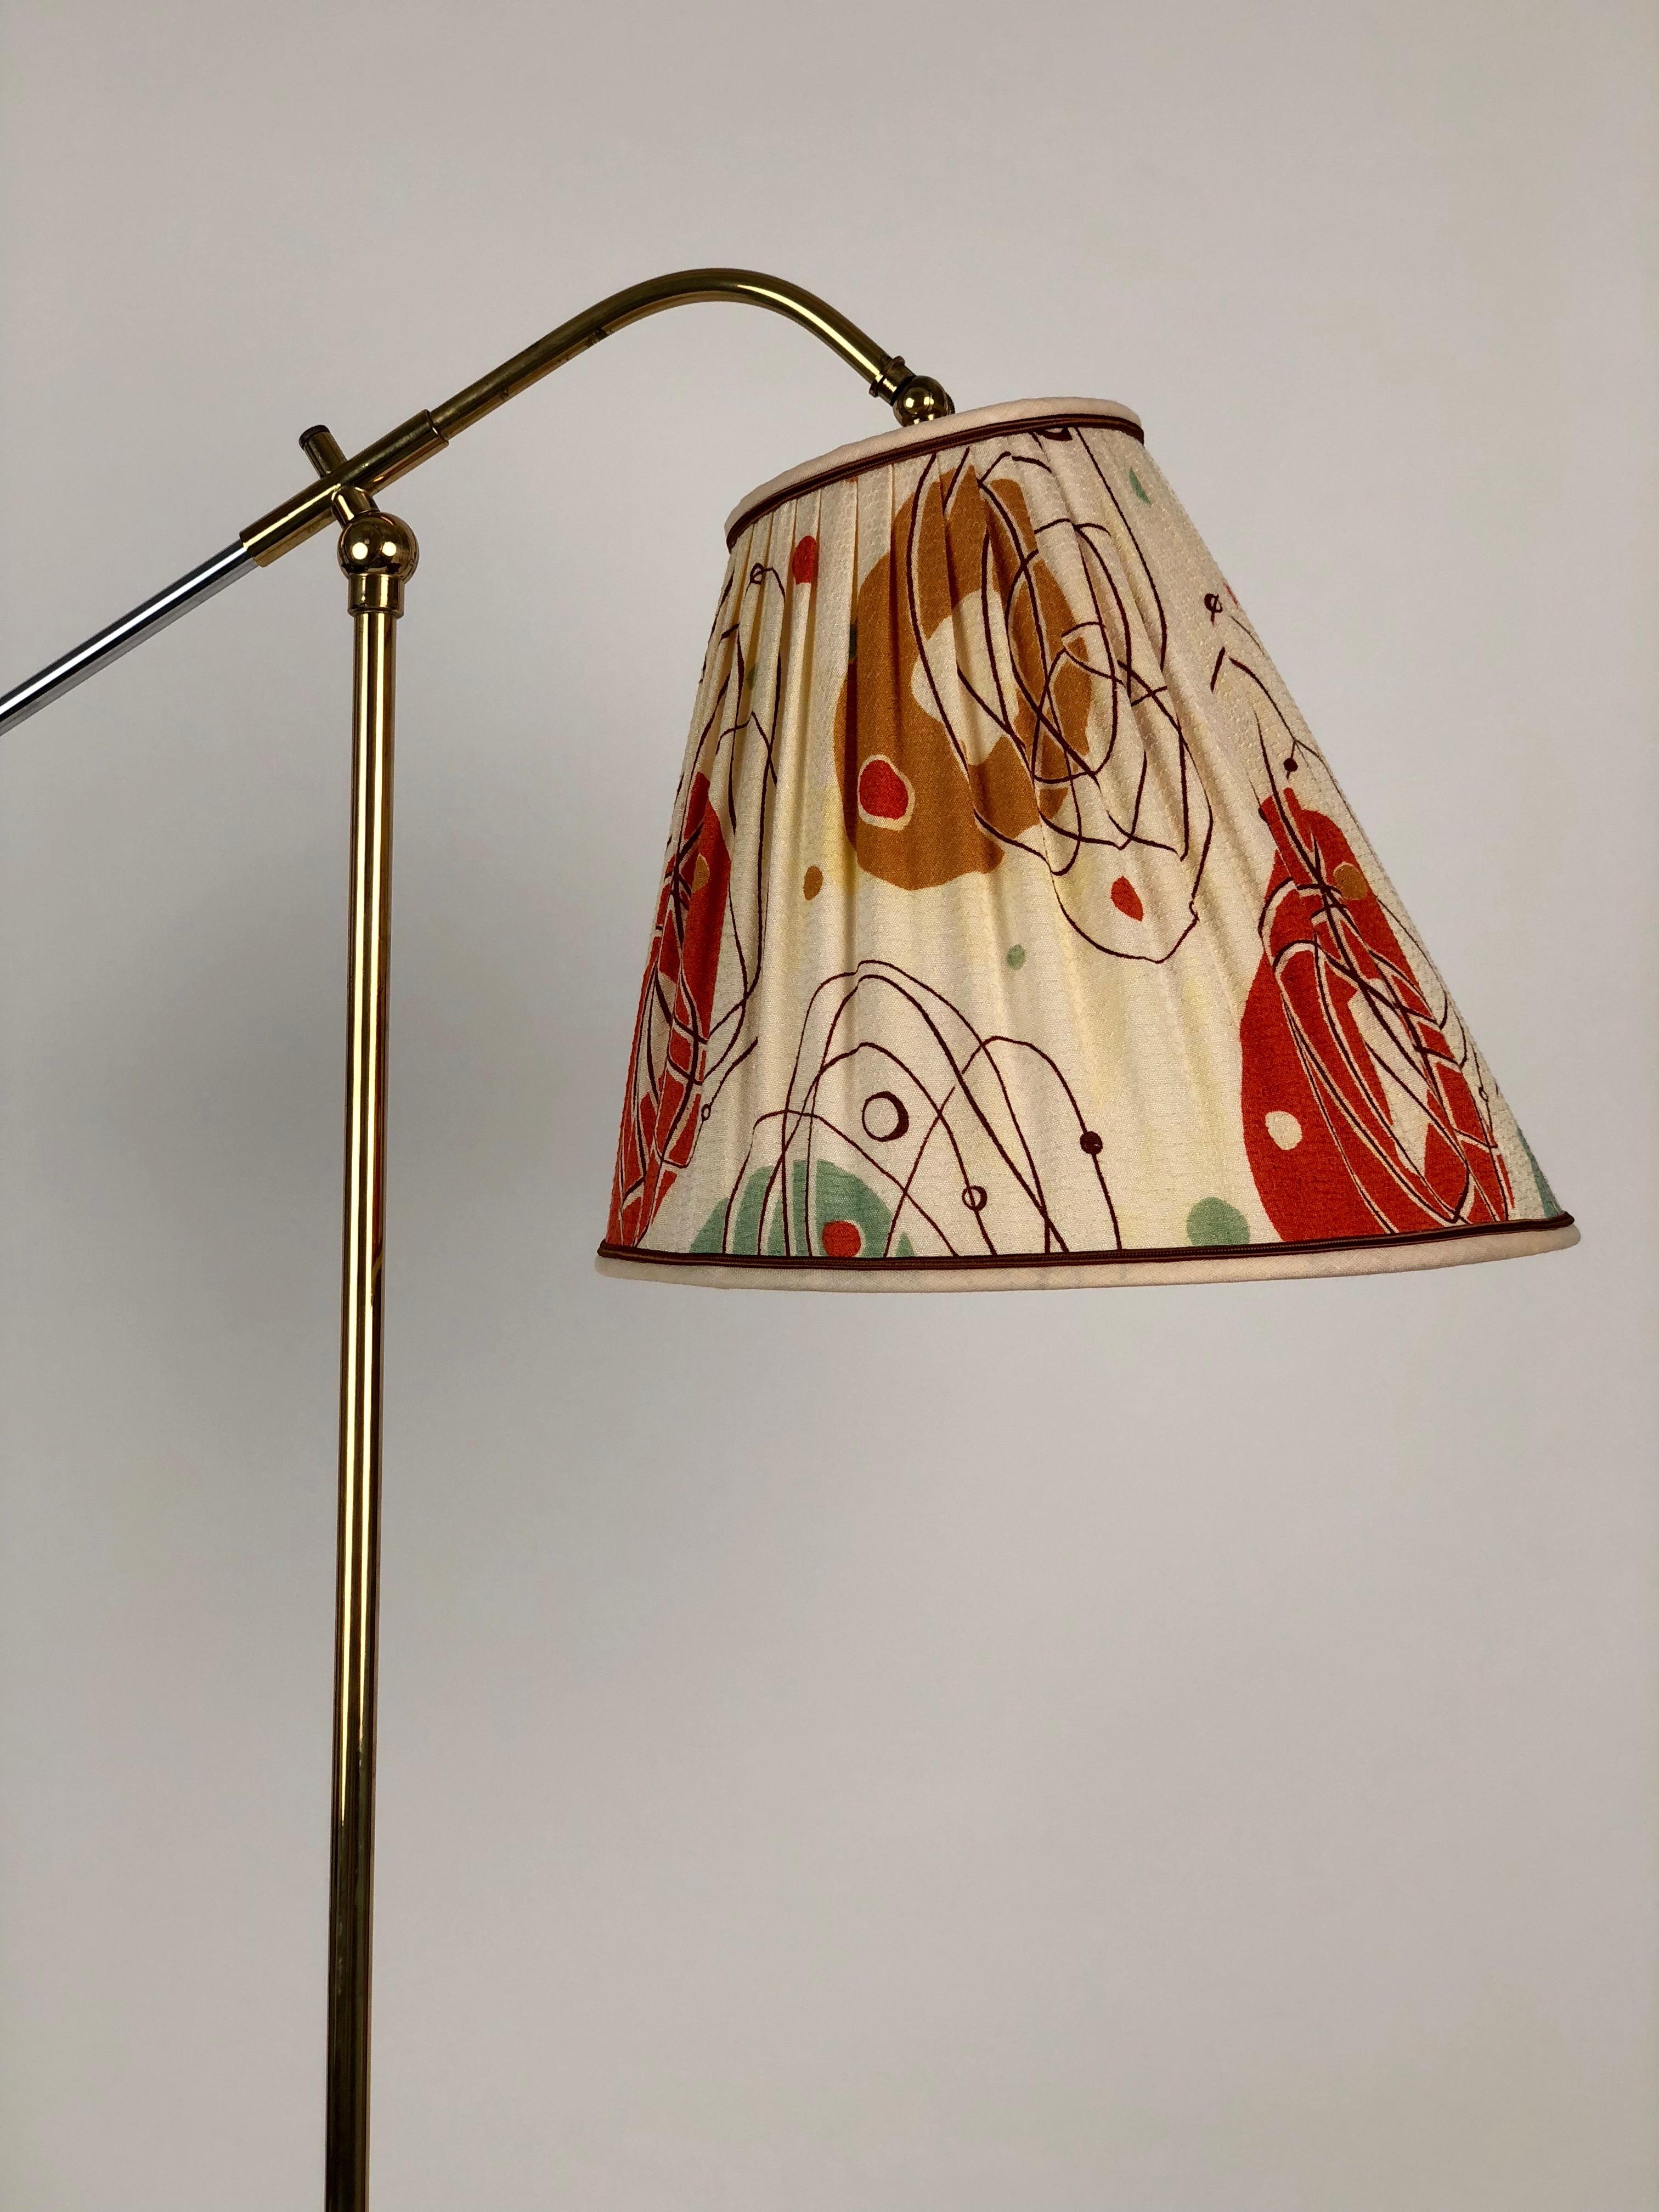 Lacquered Mid-Century Modern Brass Floor Lamp, Produced by Rupert Nikoll, Austria, 1950s For Sale